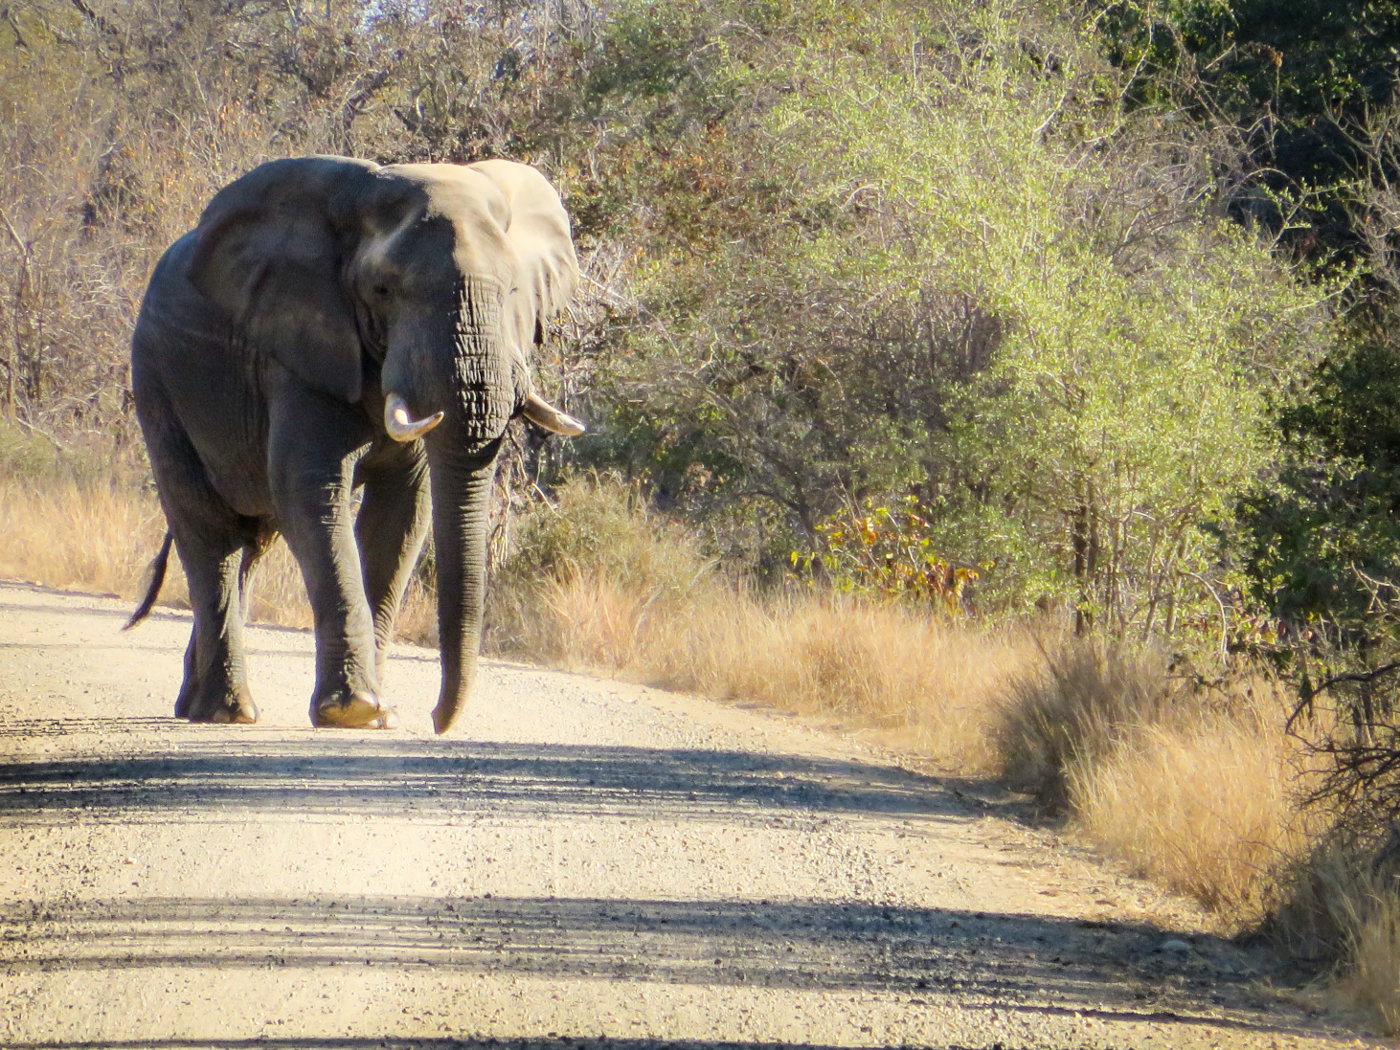 A large elephant in the a dirt road